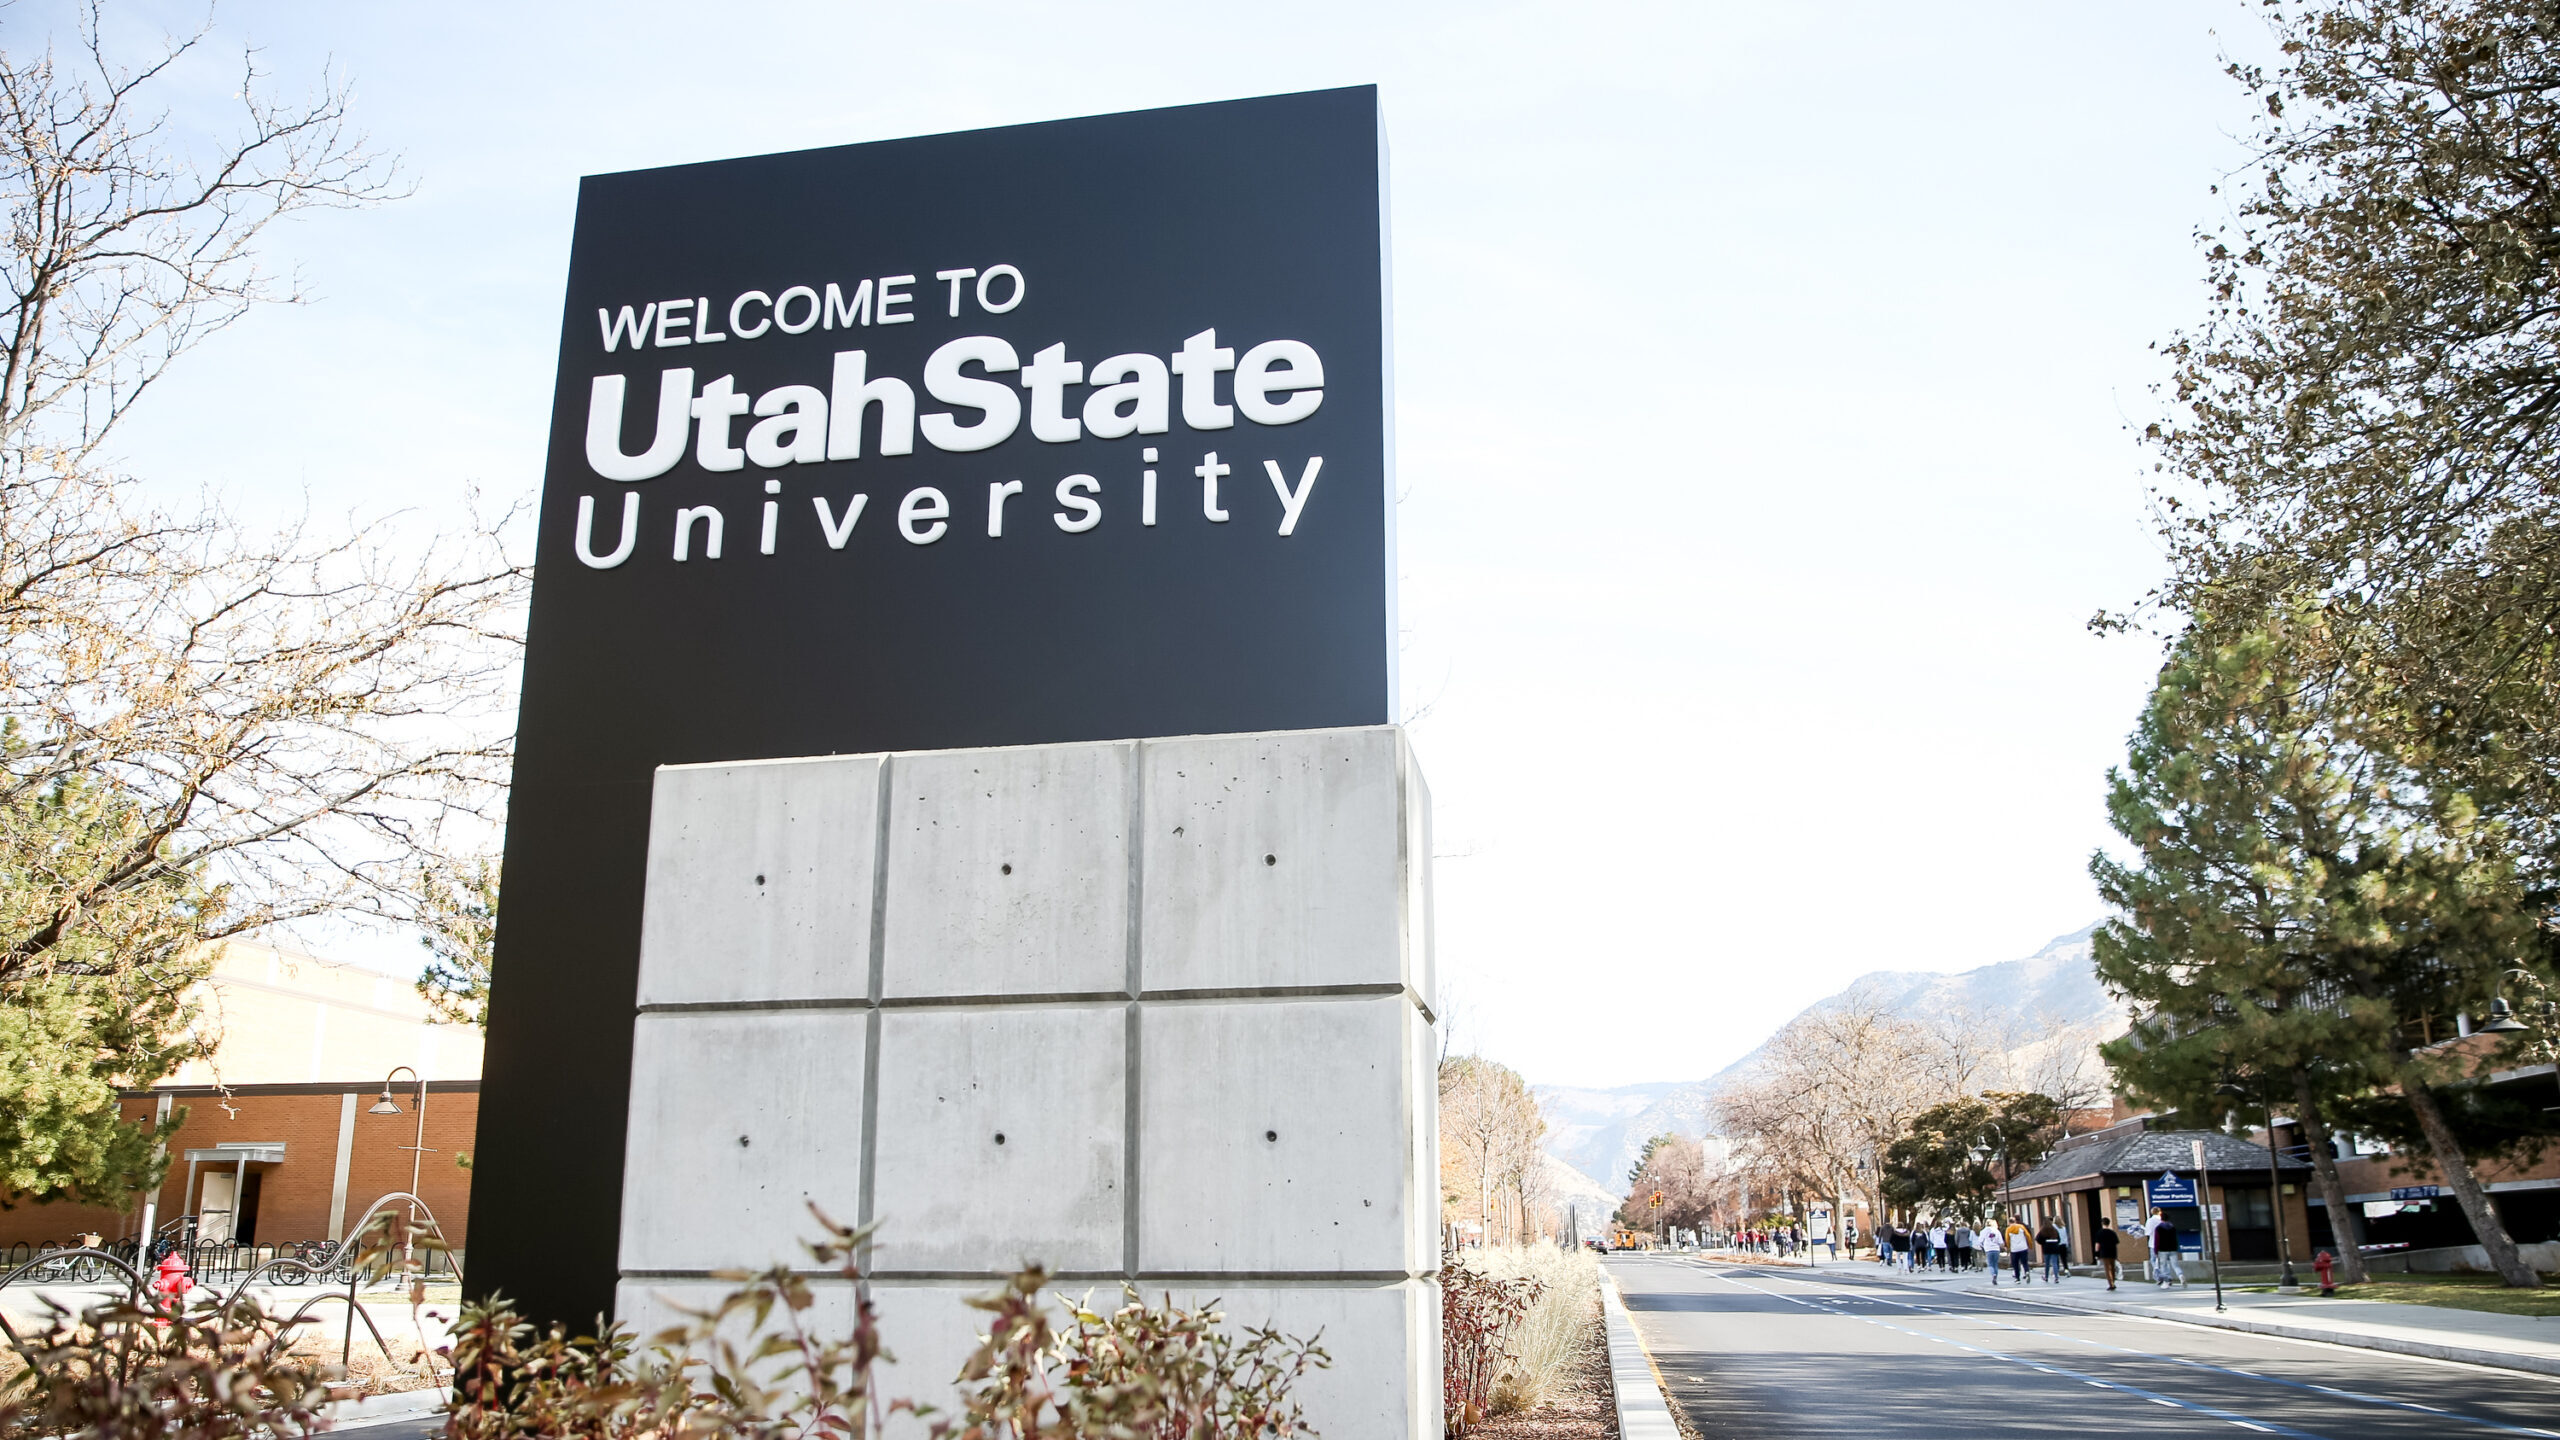 usu sign pictured, colleges in utah are tackling dei initiatives...